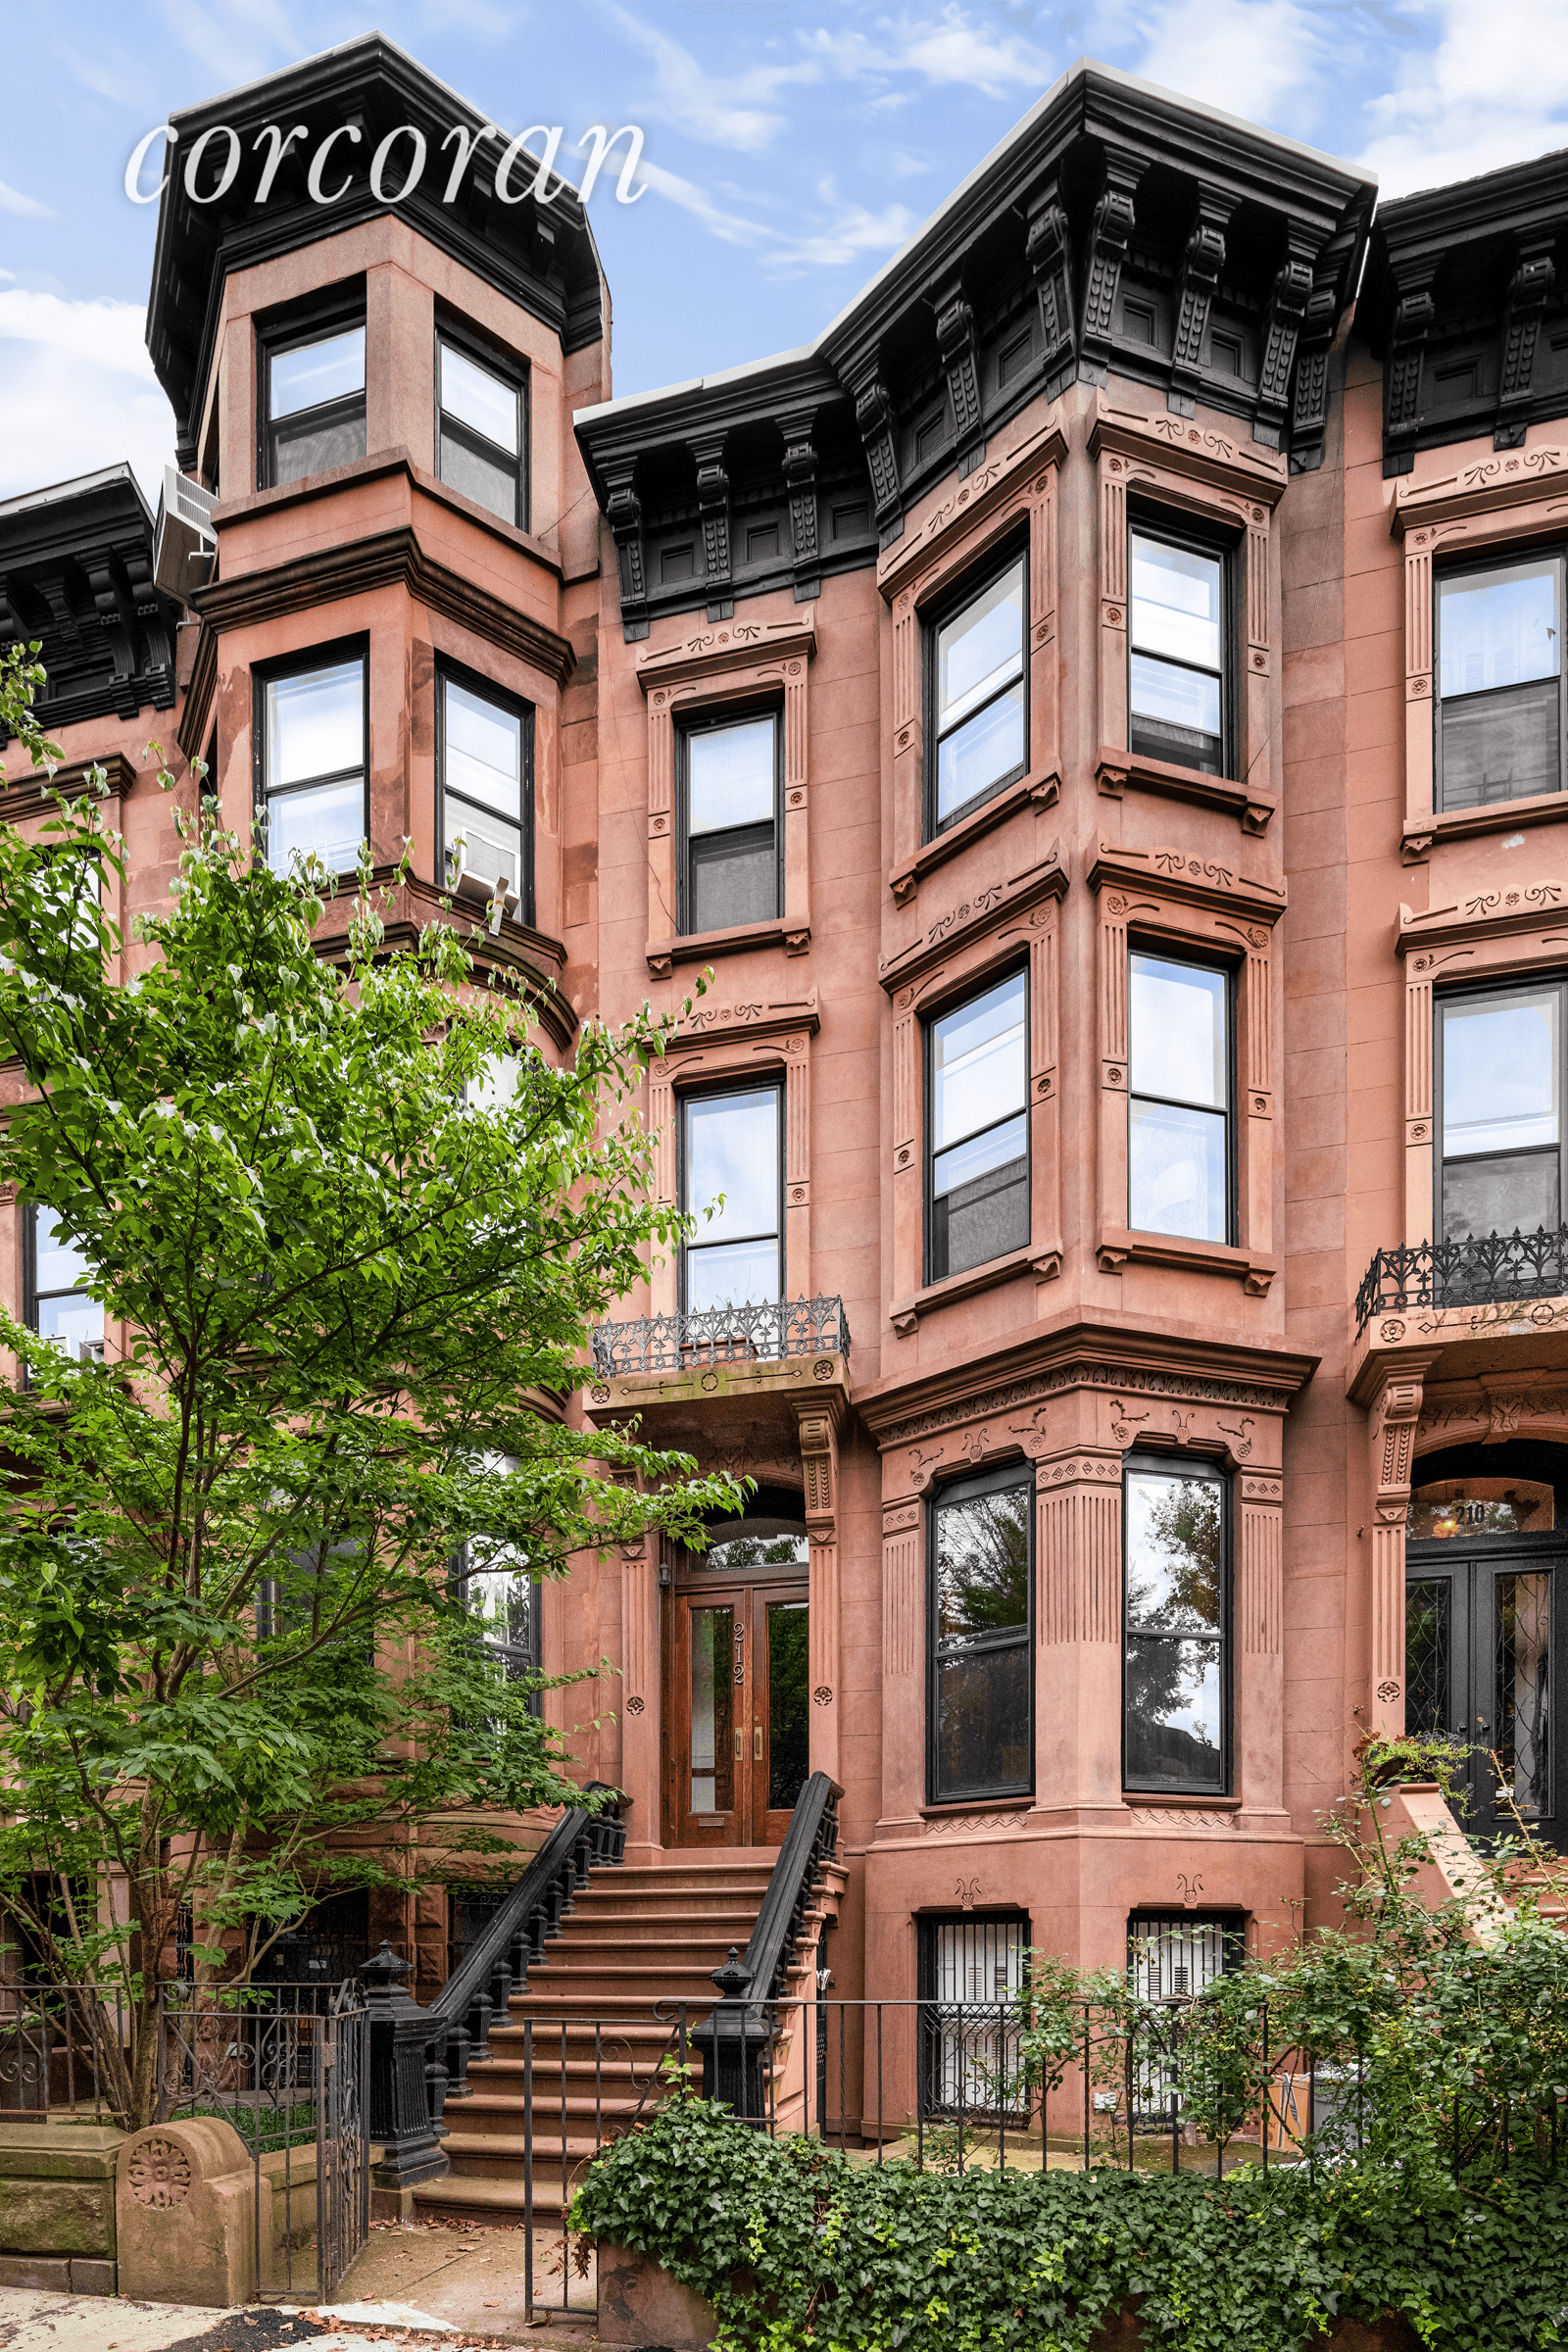 PERFECT HARMONY. Previously owned by William Gaynor, former mayor of New York, this Park Slope brownstone has a unique combination of proximity, remove, size, intimacy and condition youve been looking ...